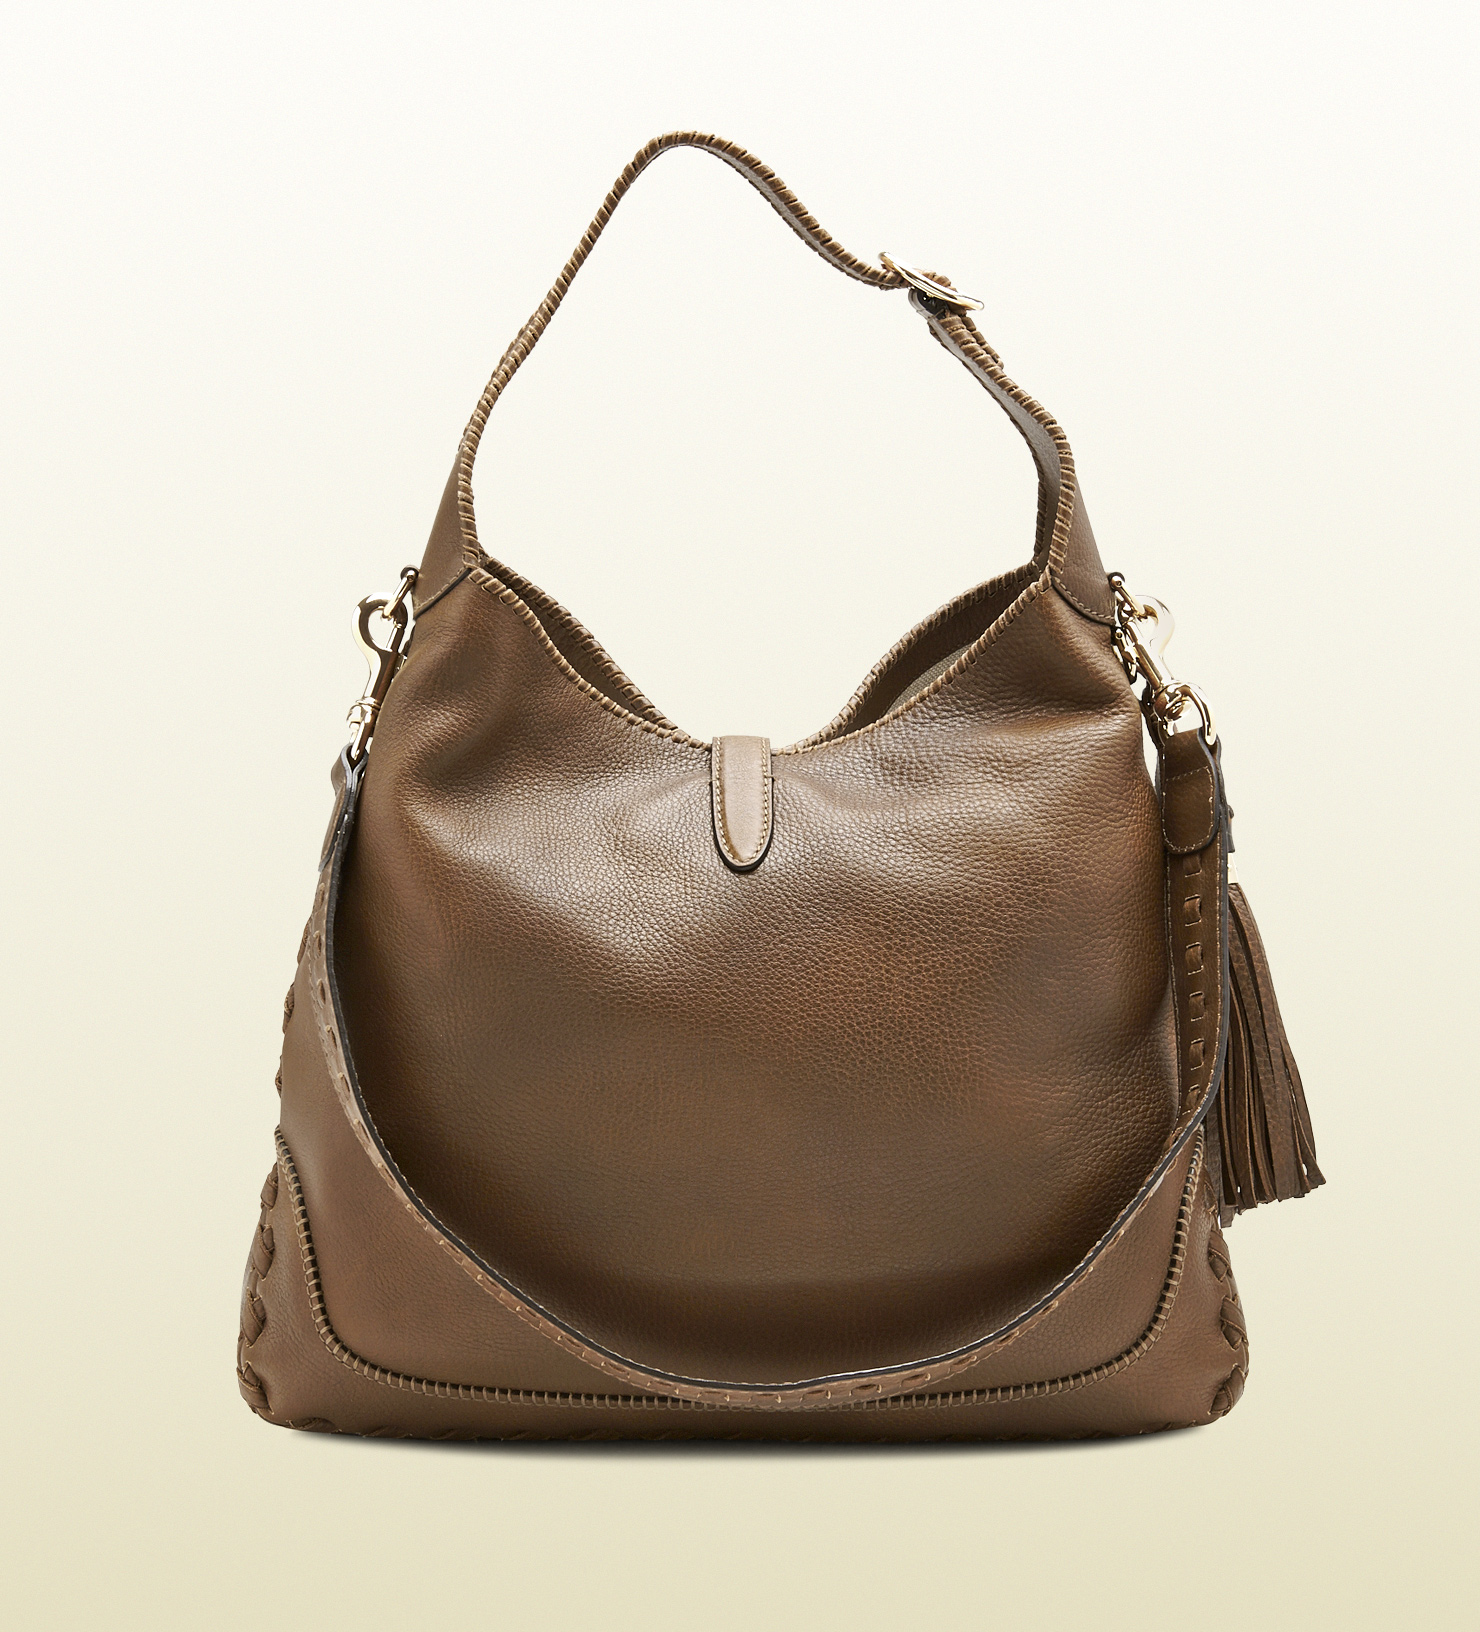 Gucci New Jackie Leather Shoulder Bag in Brown - Lyst